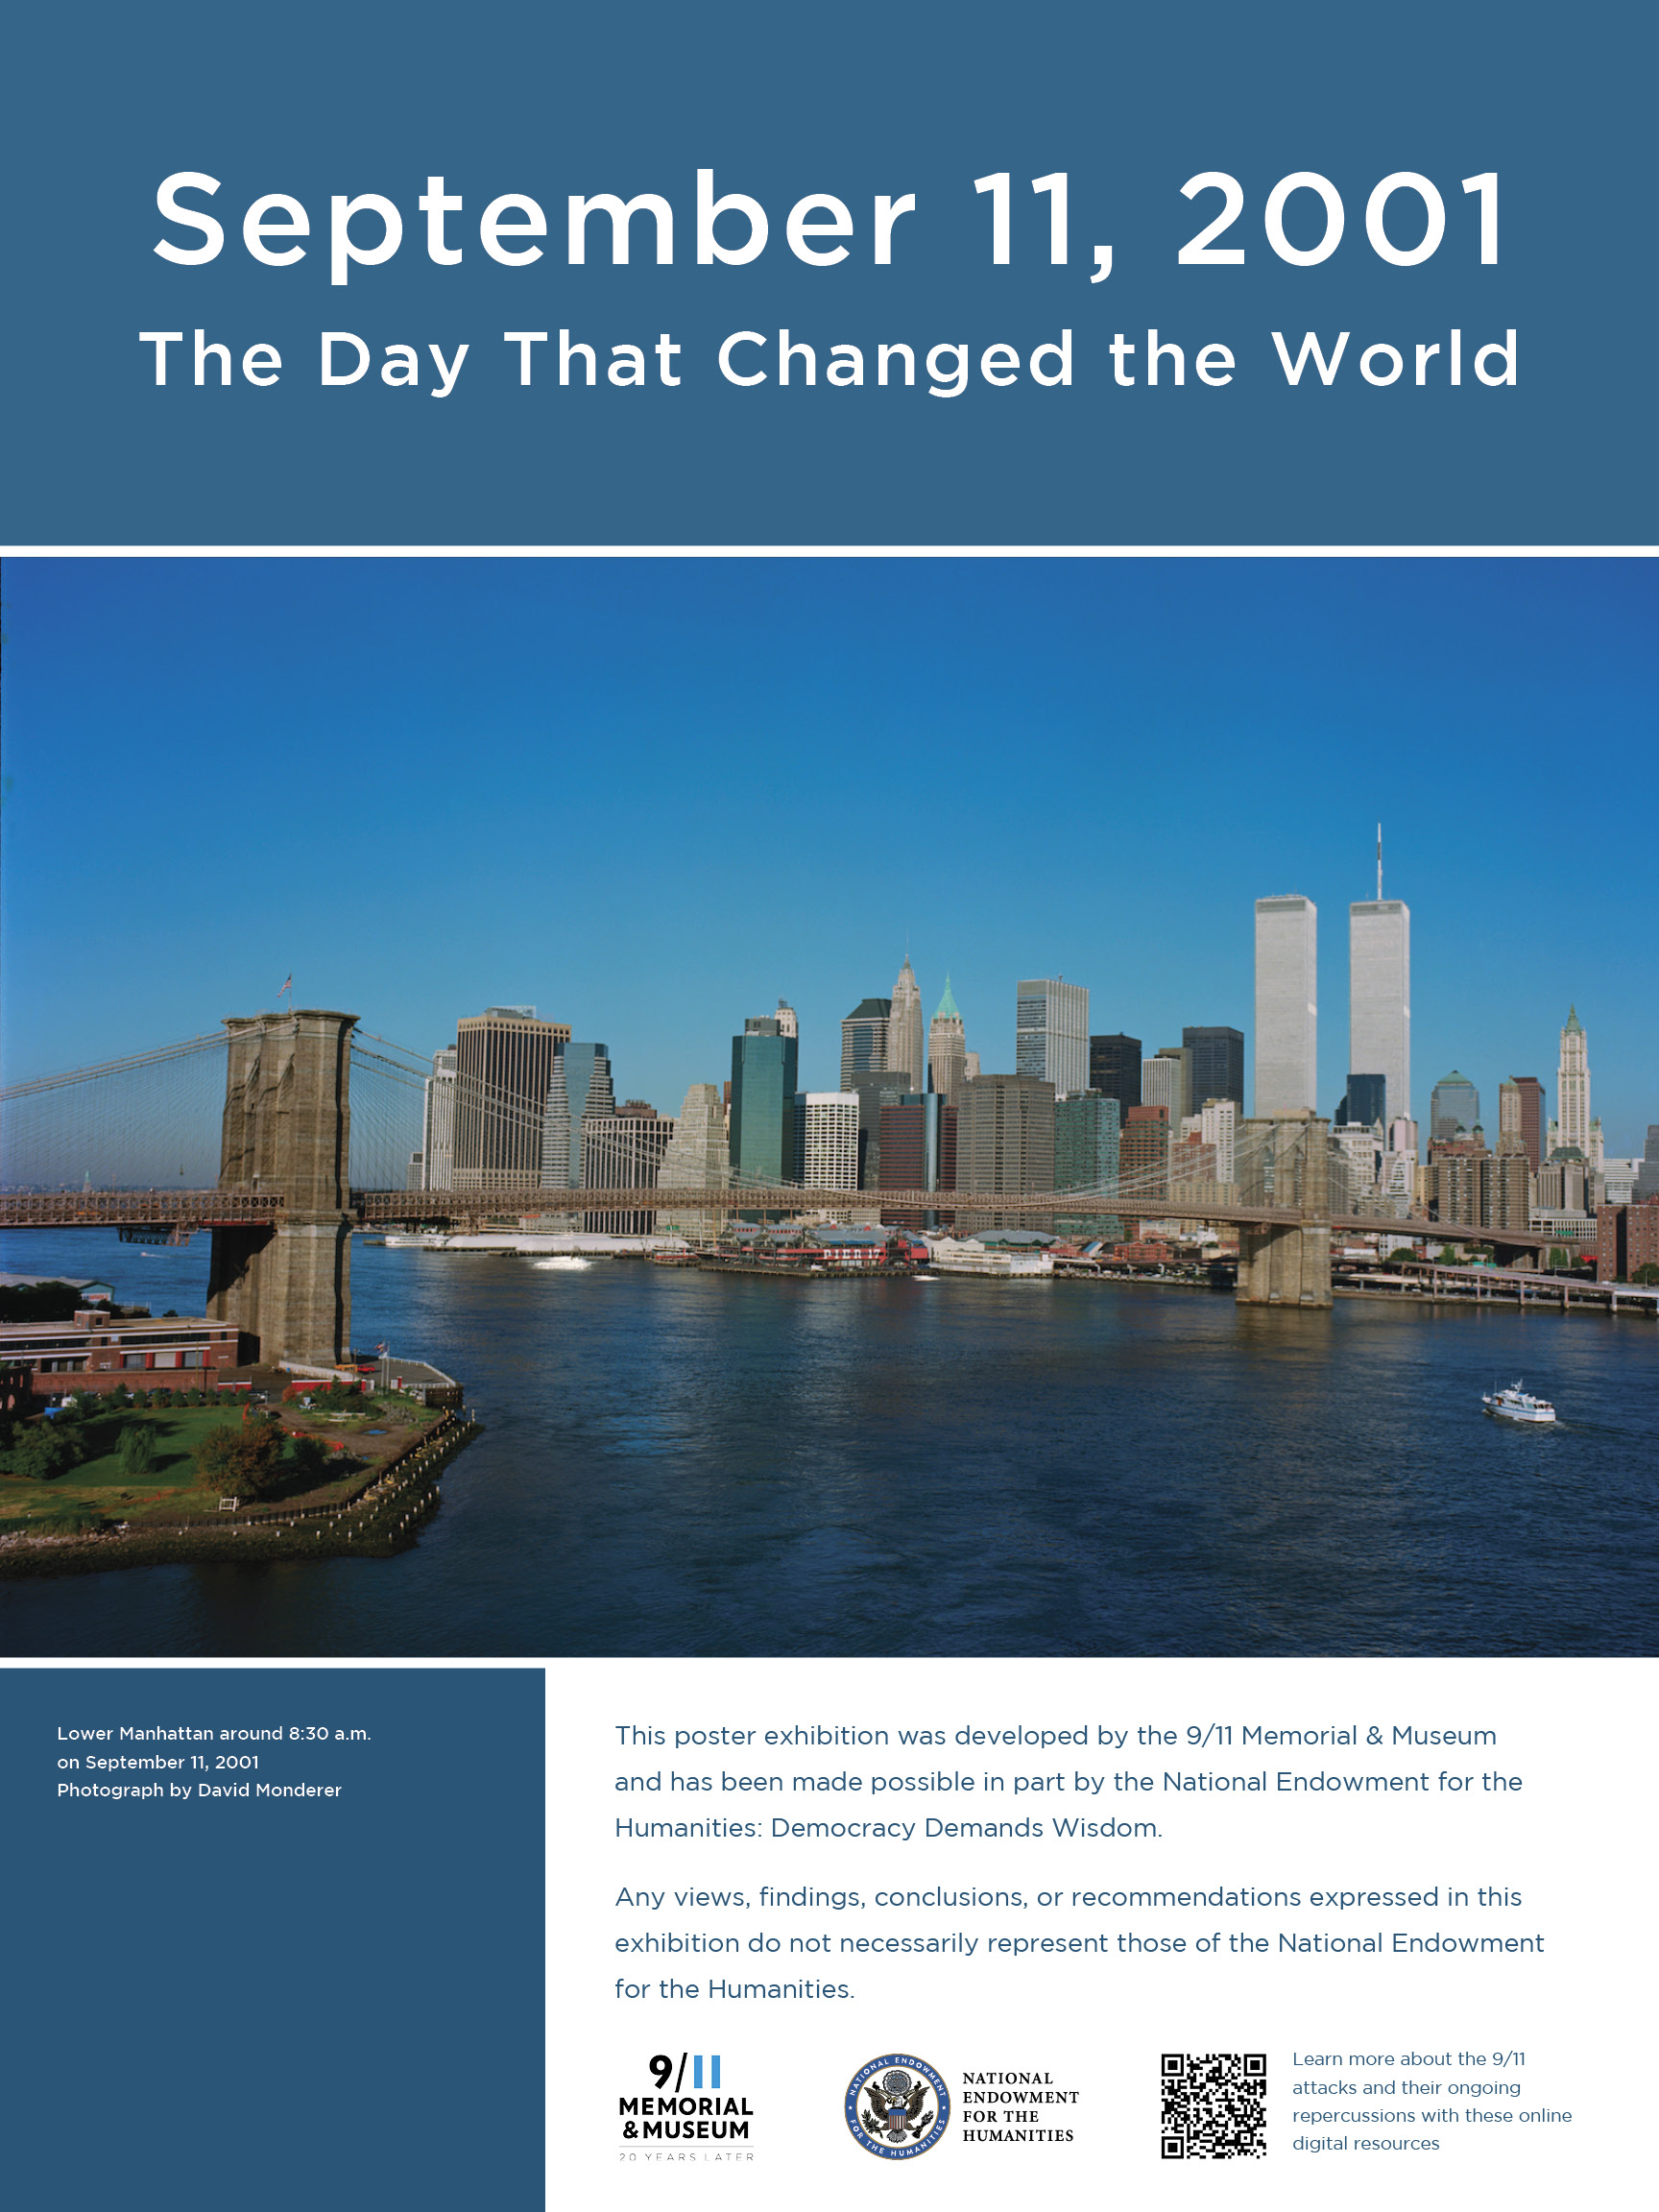 Poster page header reads September 11, 2001: The Day That Changed the World. Photograph below the header shows the skyline of lower Manhattan with the Twin Towers. Lower portion includes the logos of the 9/11 Memorial & Museum and the National Endowment for the Humanities. 